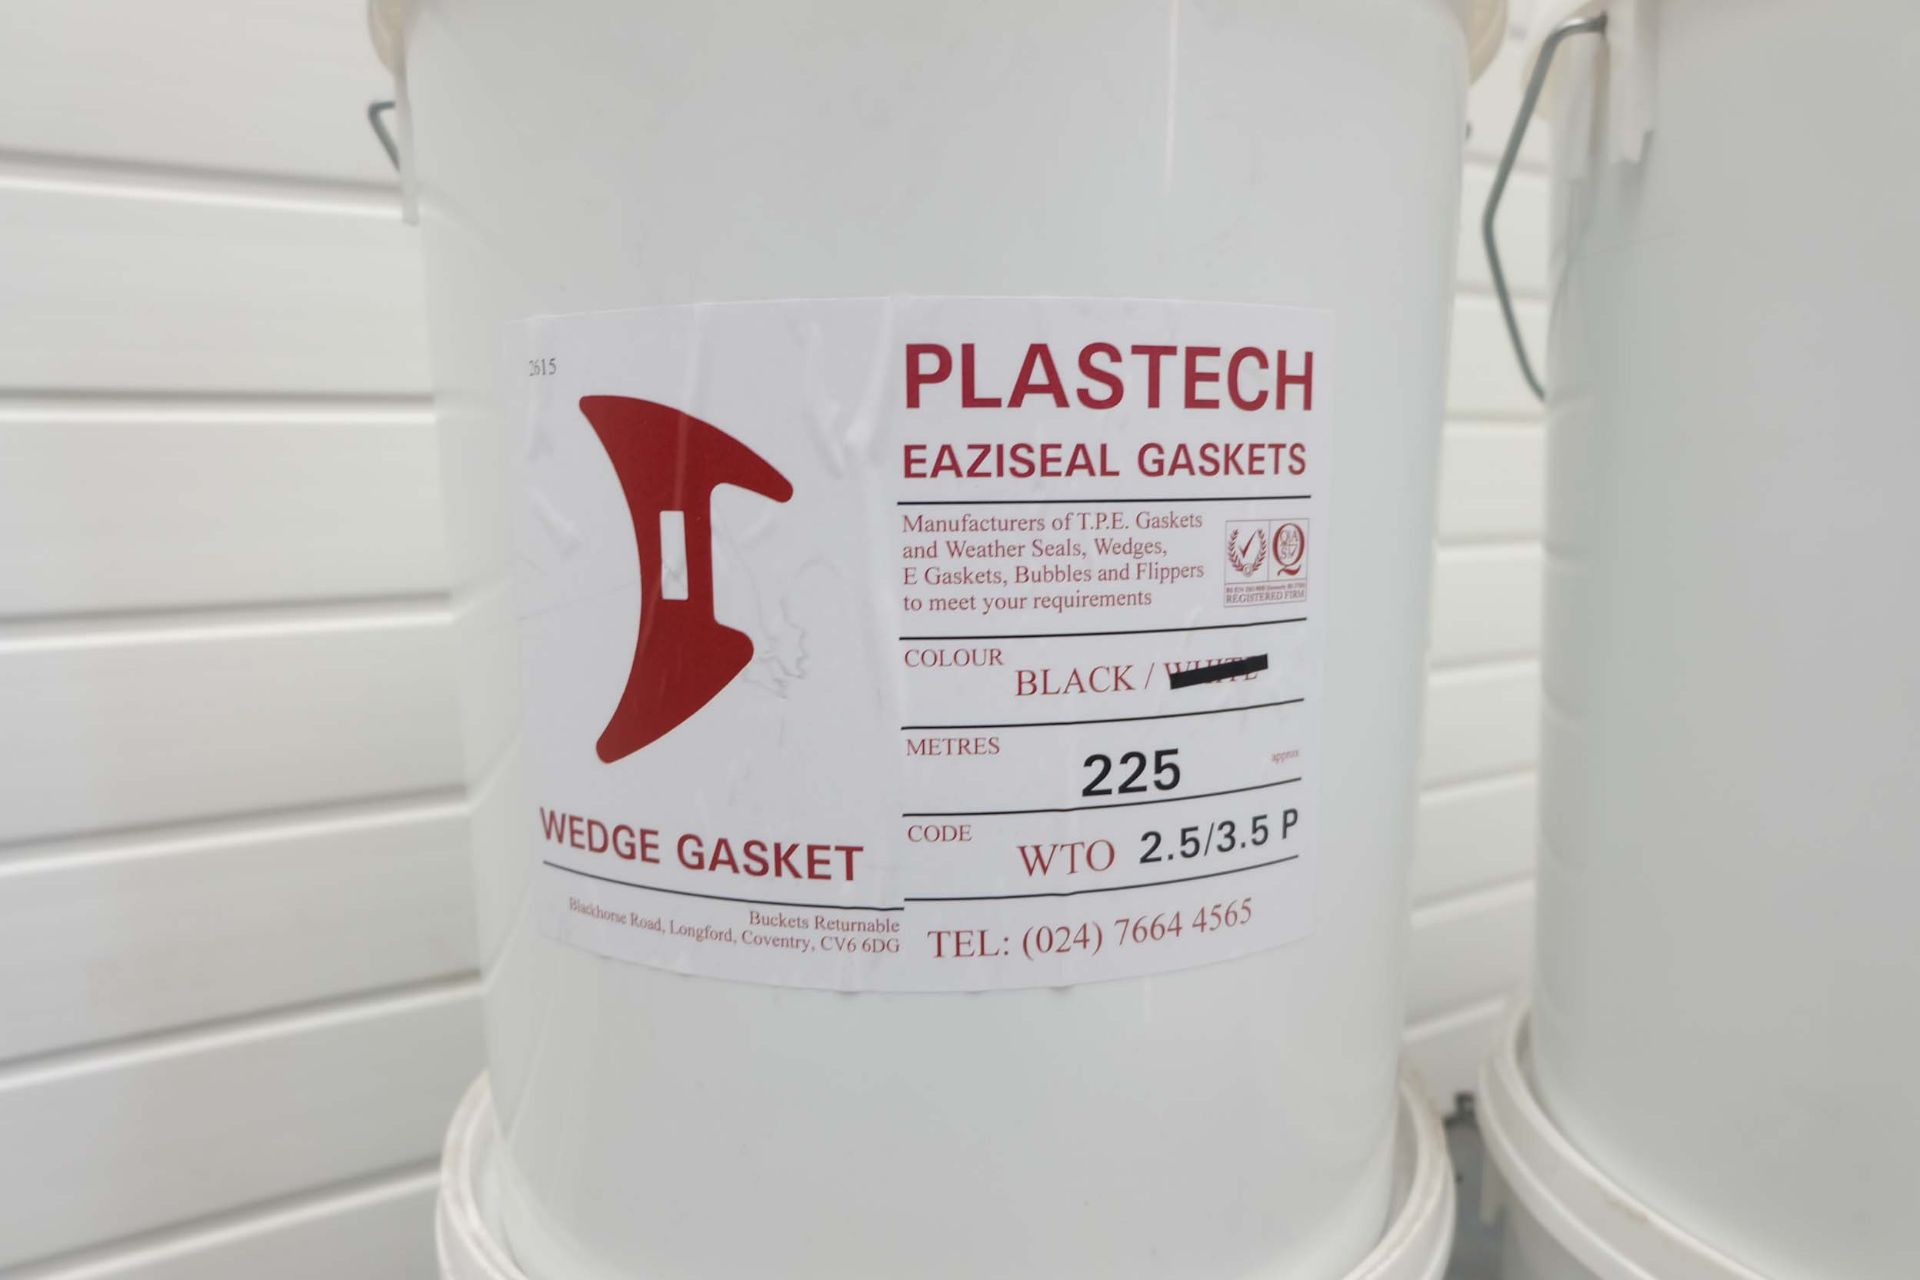 2 x Plastech Eaziseal Wedge Gasket Colour Black. 7 x Tubs of Approx 225 Mtrs. - Image 2 of 3